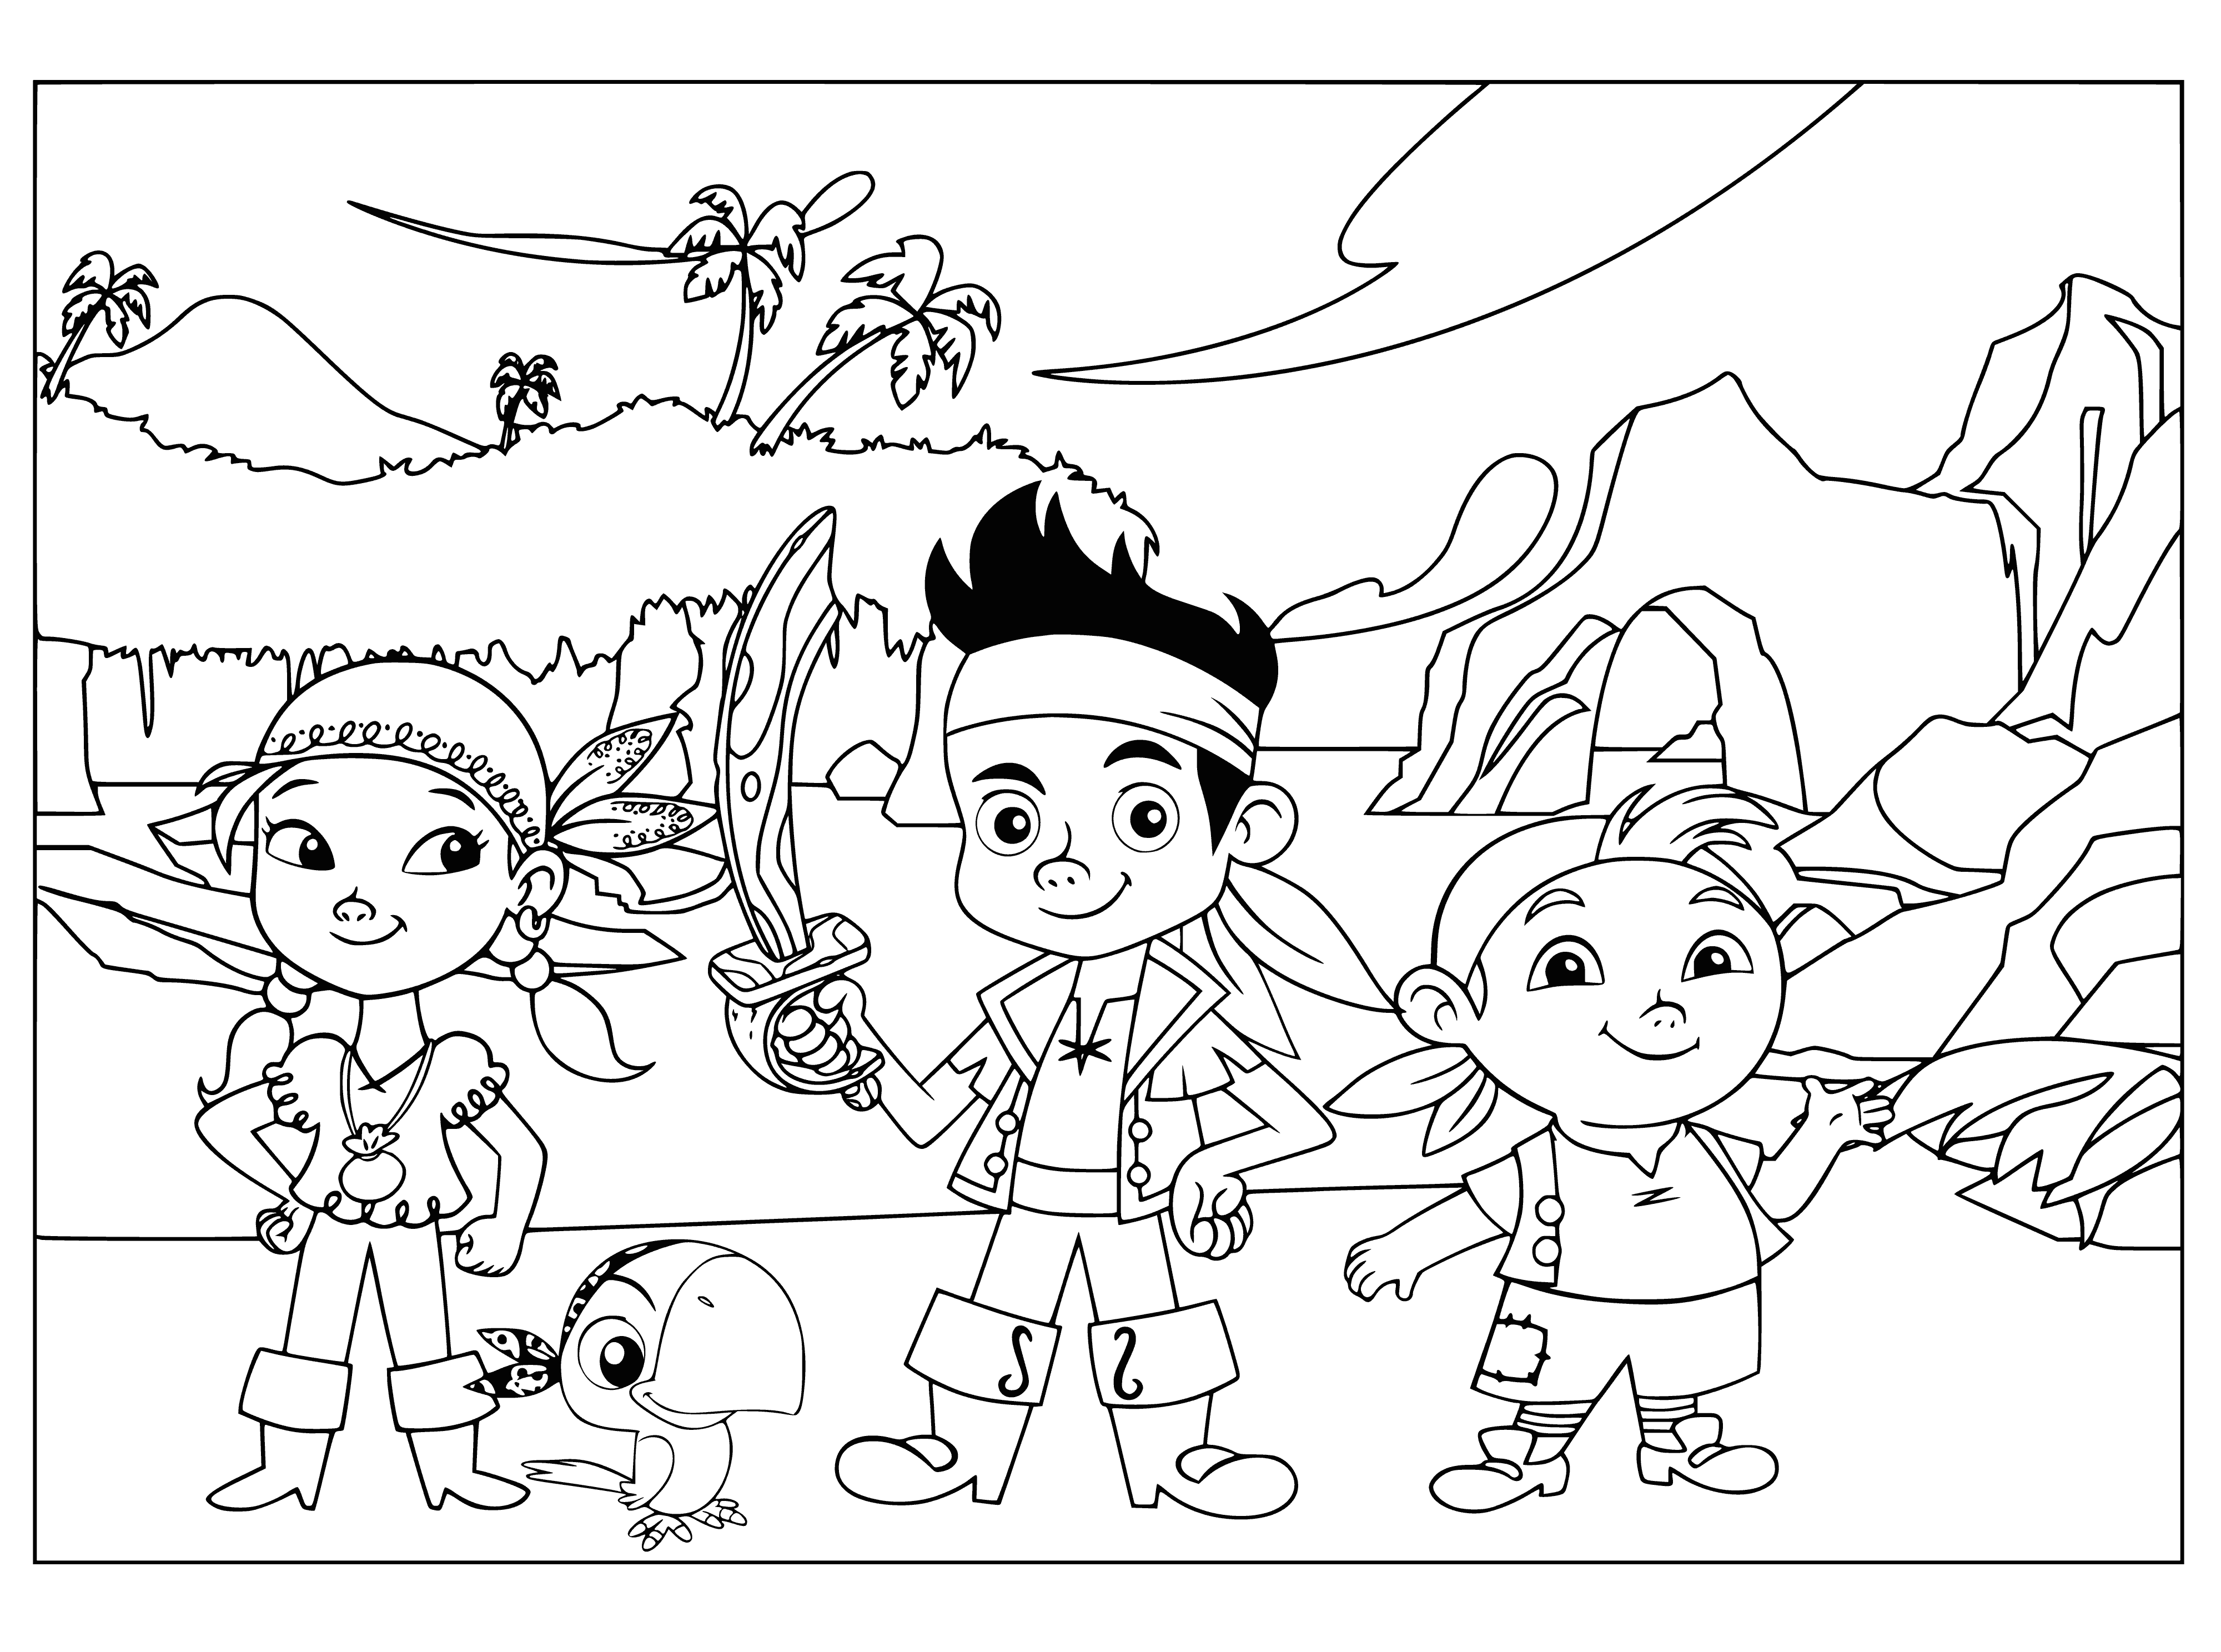 Jake's team coloring page